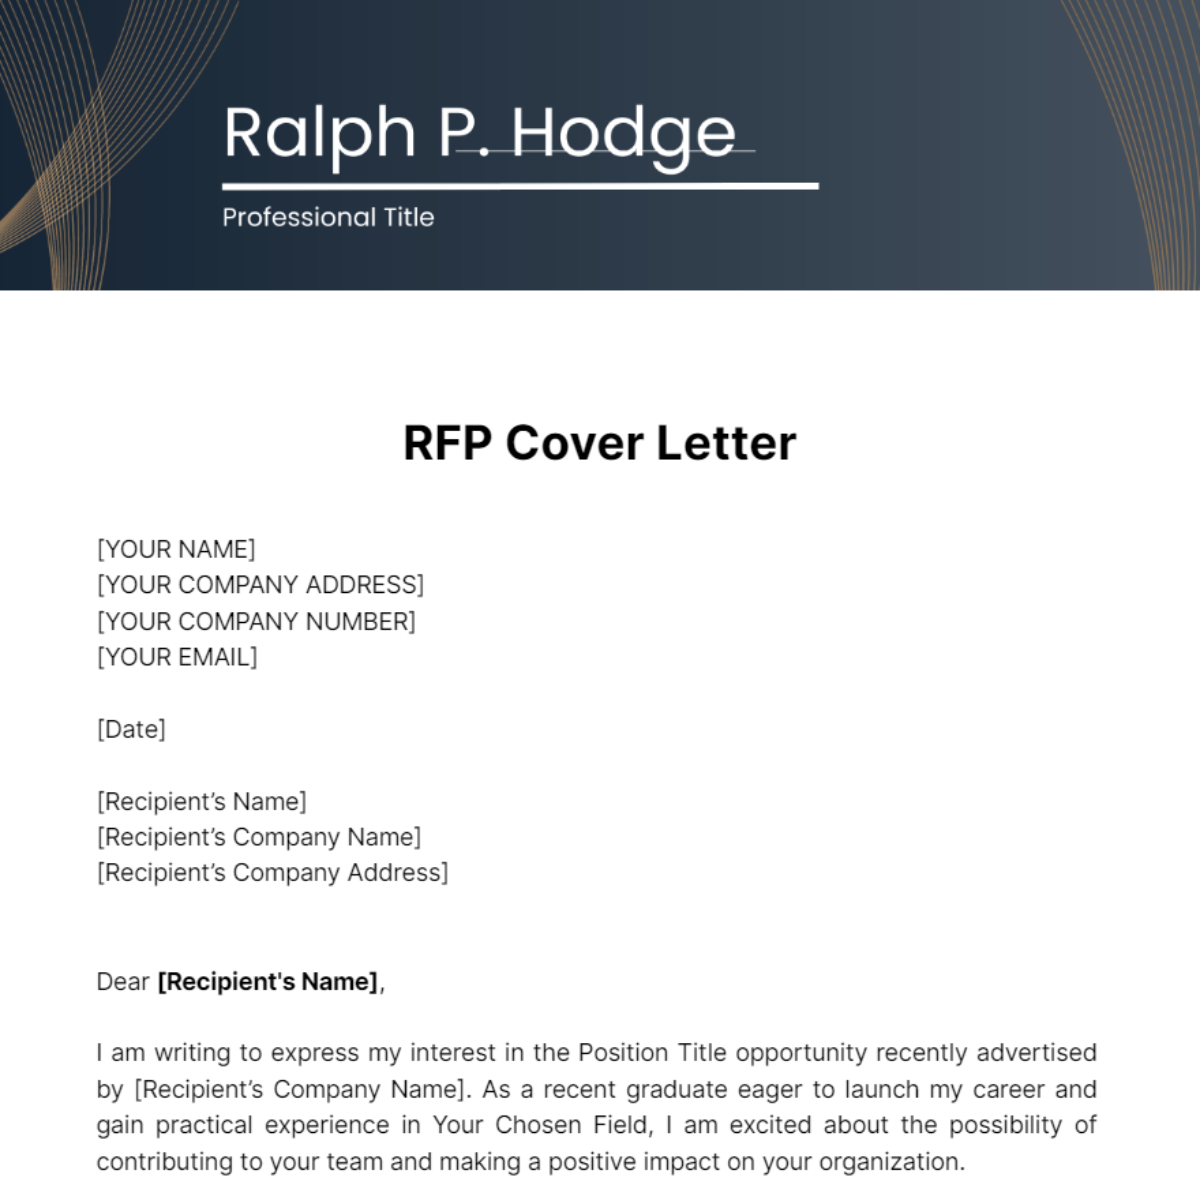 RFP Cover Letter Template